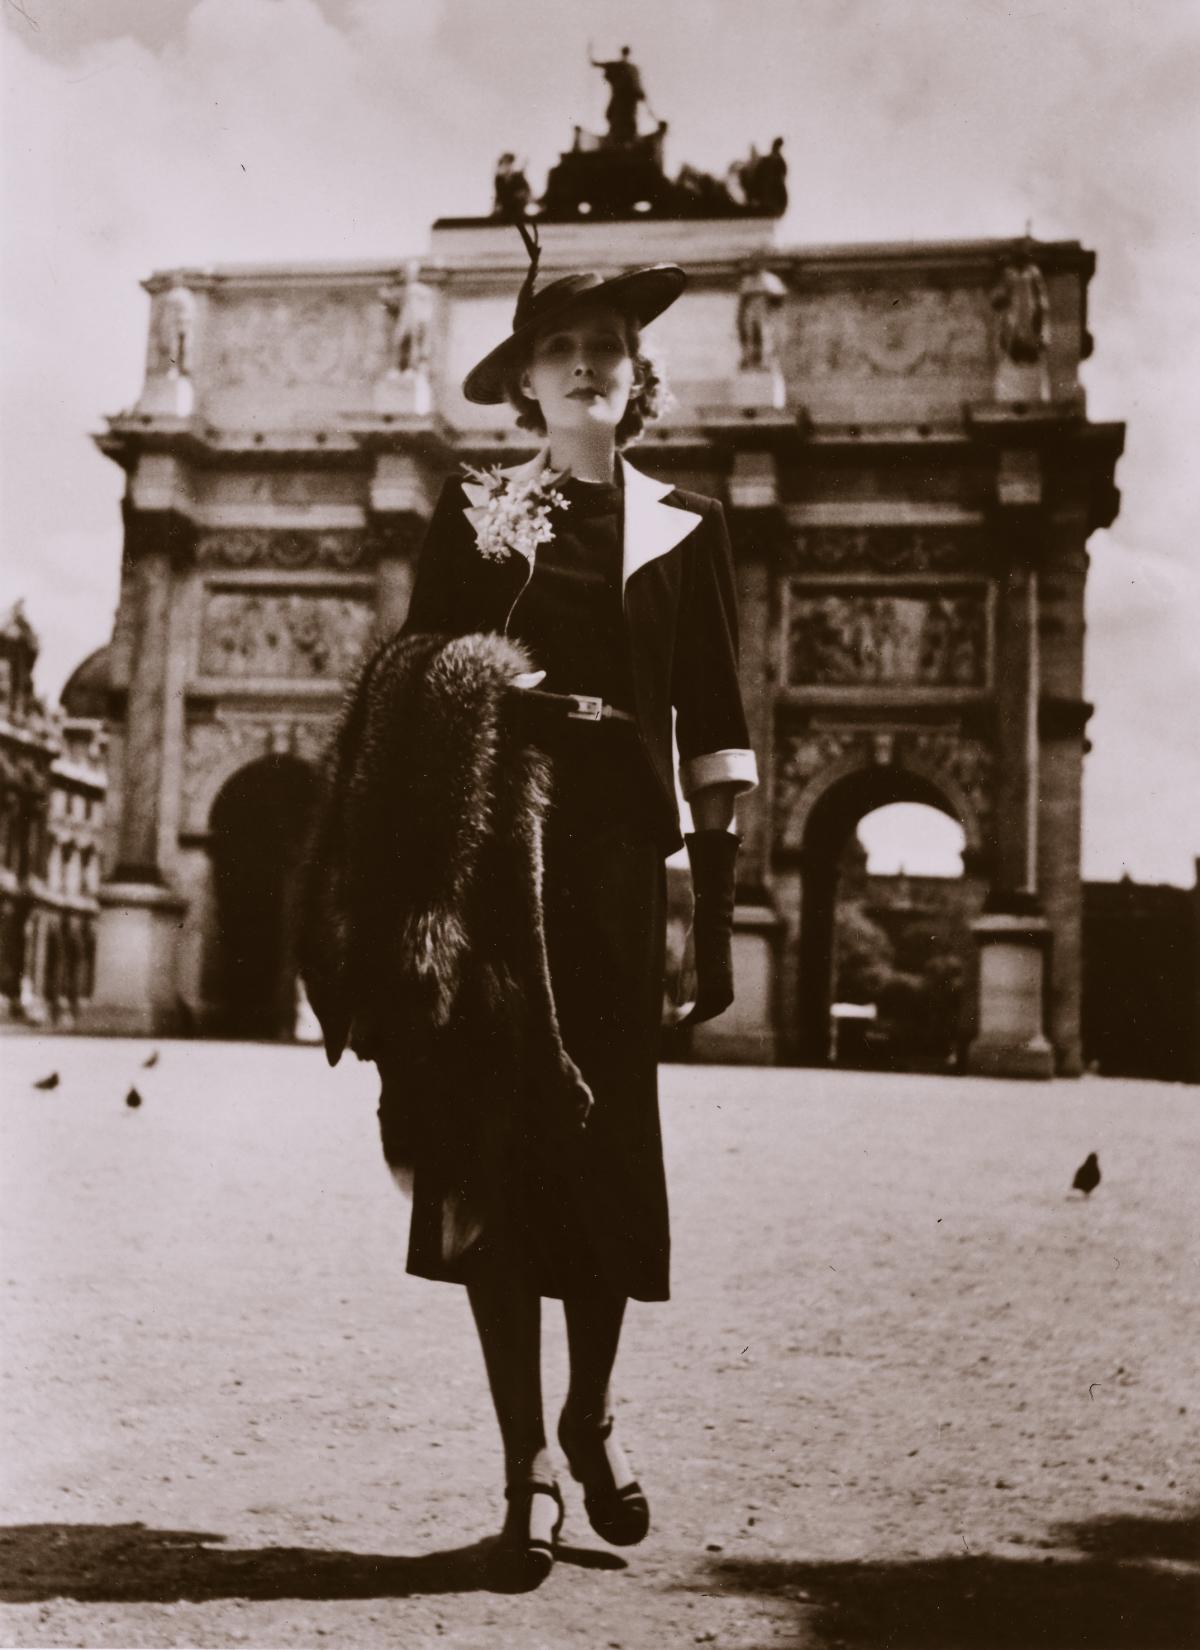 Bedwell, wearing black dress, pumps, black jacket with white collar, and a flat black hat with a feather, carrying a fur stole, in front of the stone Arc